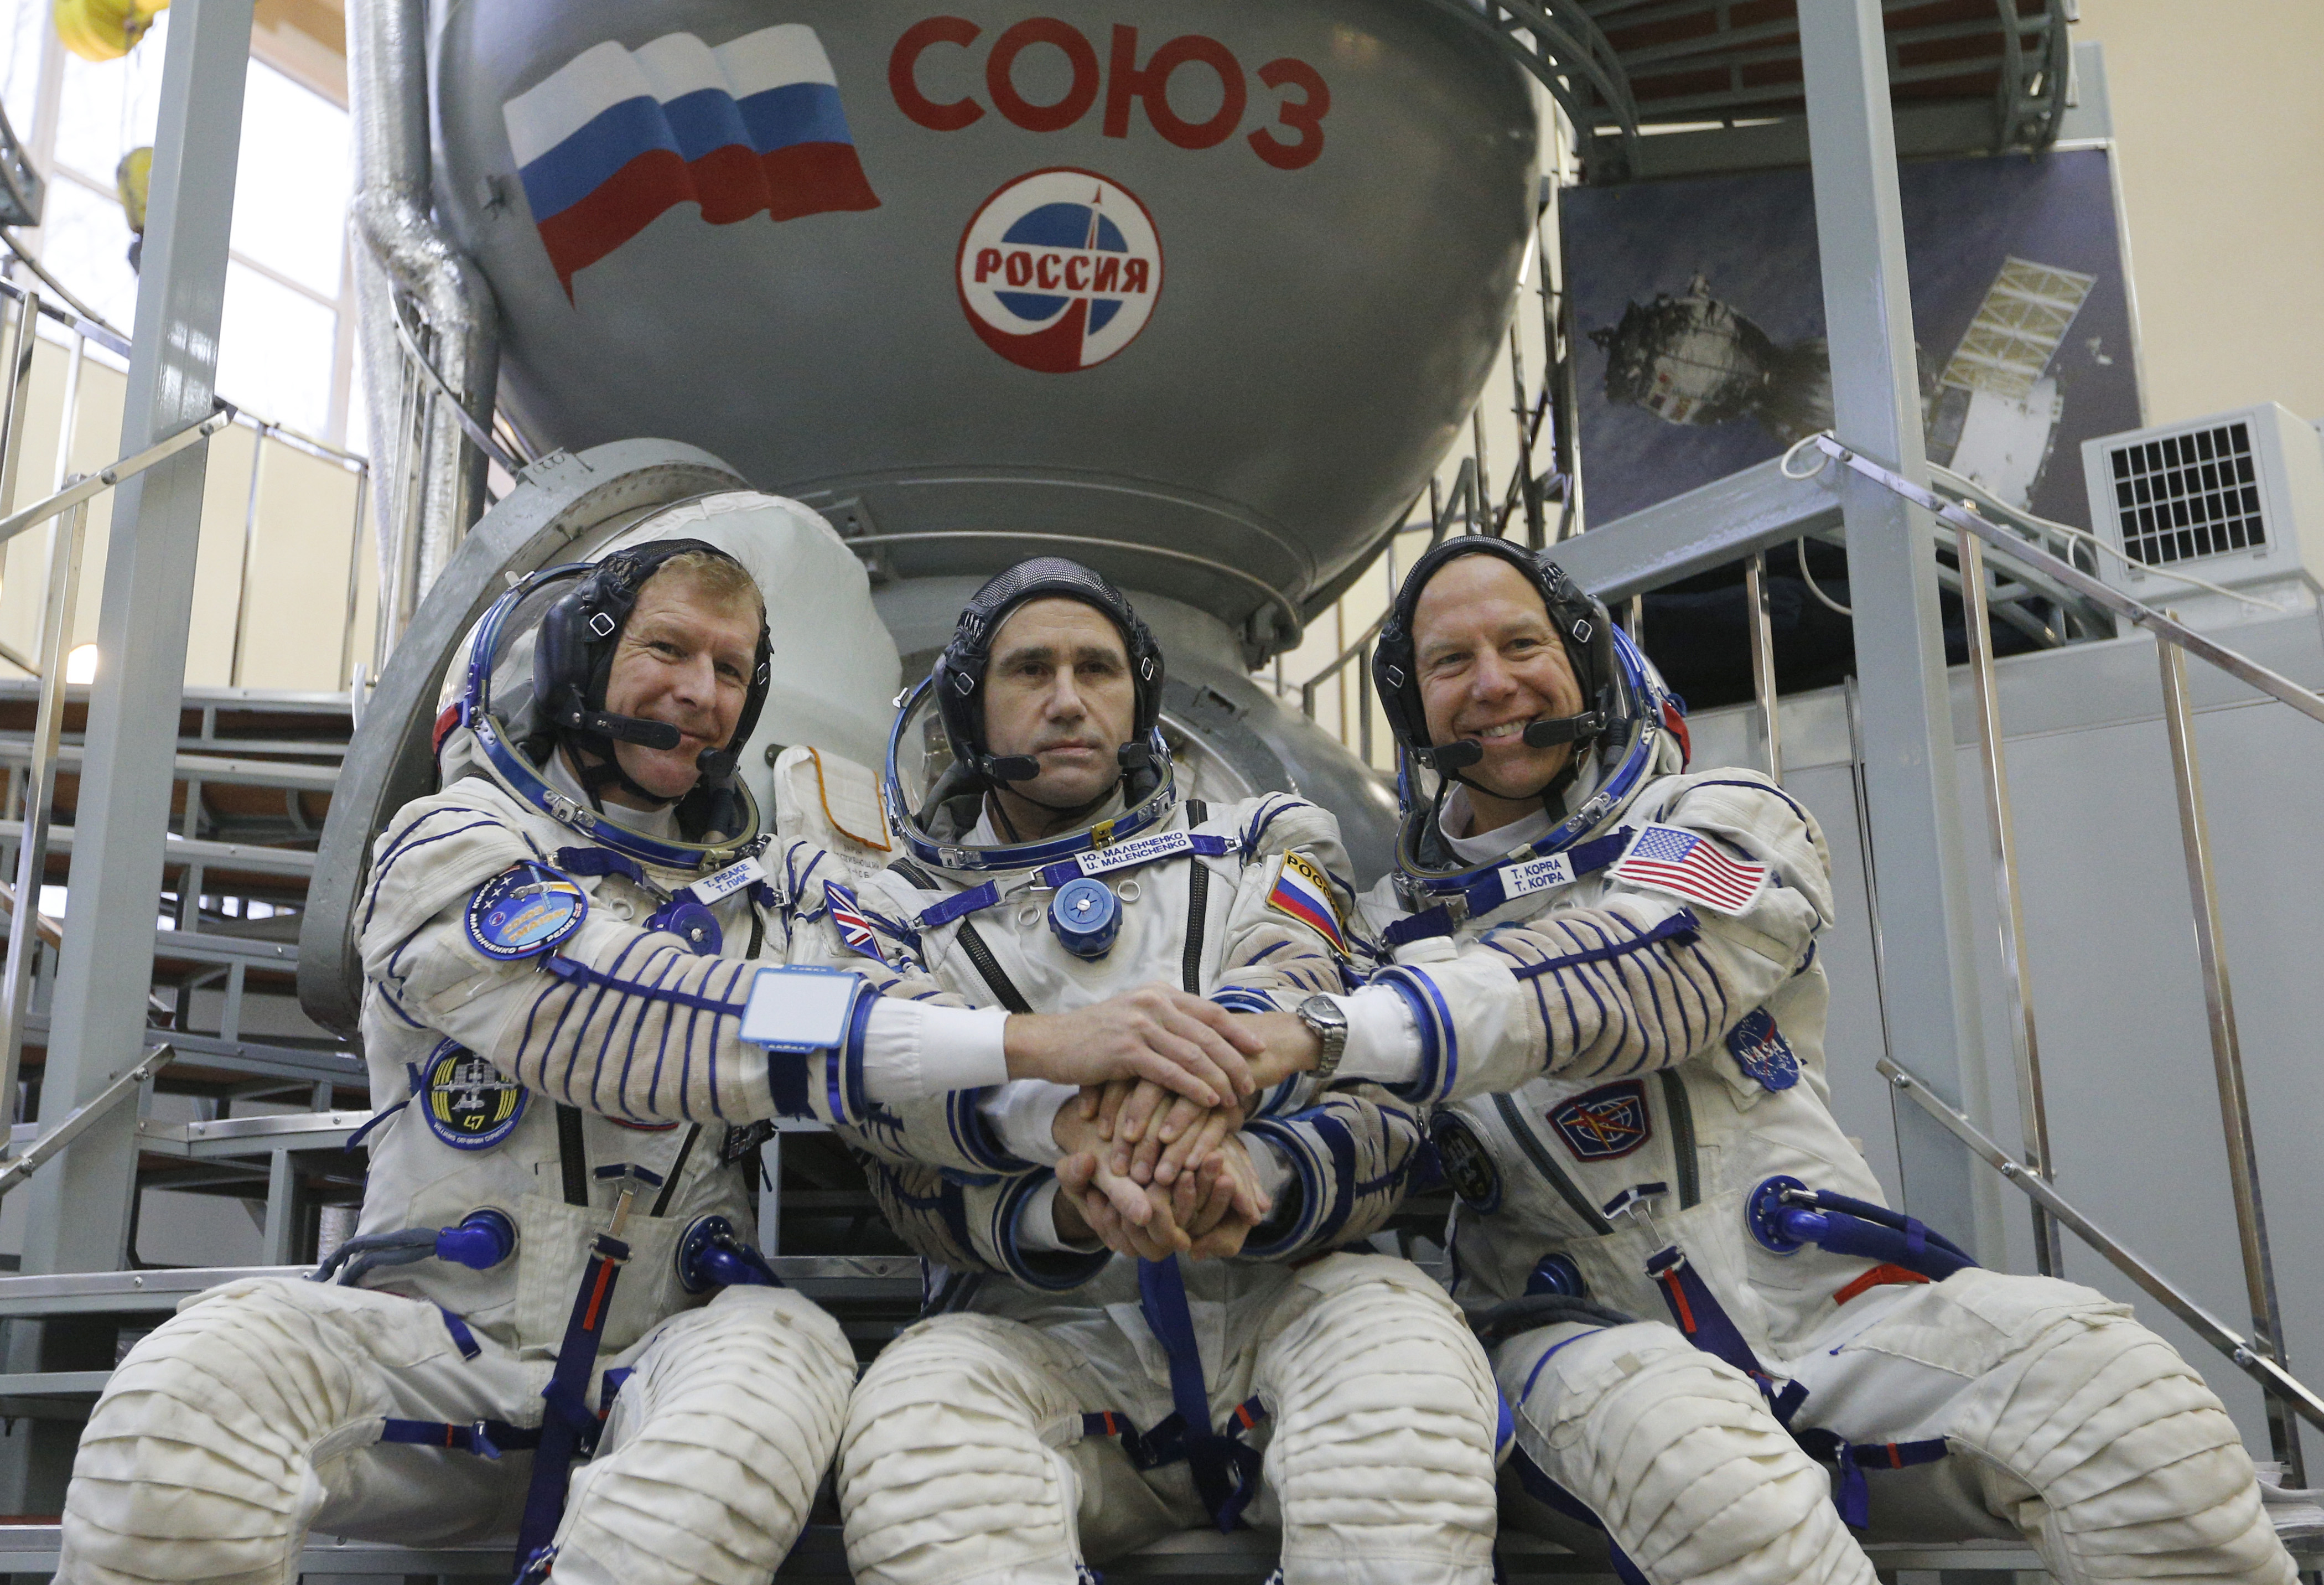 British ESA astronaut Timothy Peake, Russian cosmonaut Yuri Malenchenko and US NASA astronaut Timothy Kopra pose for the media in front of Soyuz space craft simulator prior to pass final exams in the Russian cosmonaut training center in Star City outside Moscow, Russia. Launch of the mission is scheduled on 15 December from cosmodrome Baikonur (Kazakhstan). 